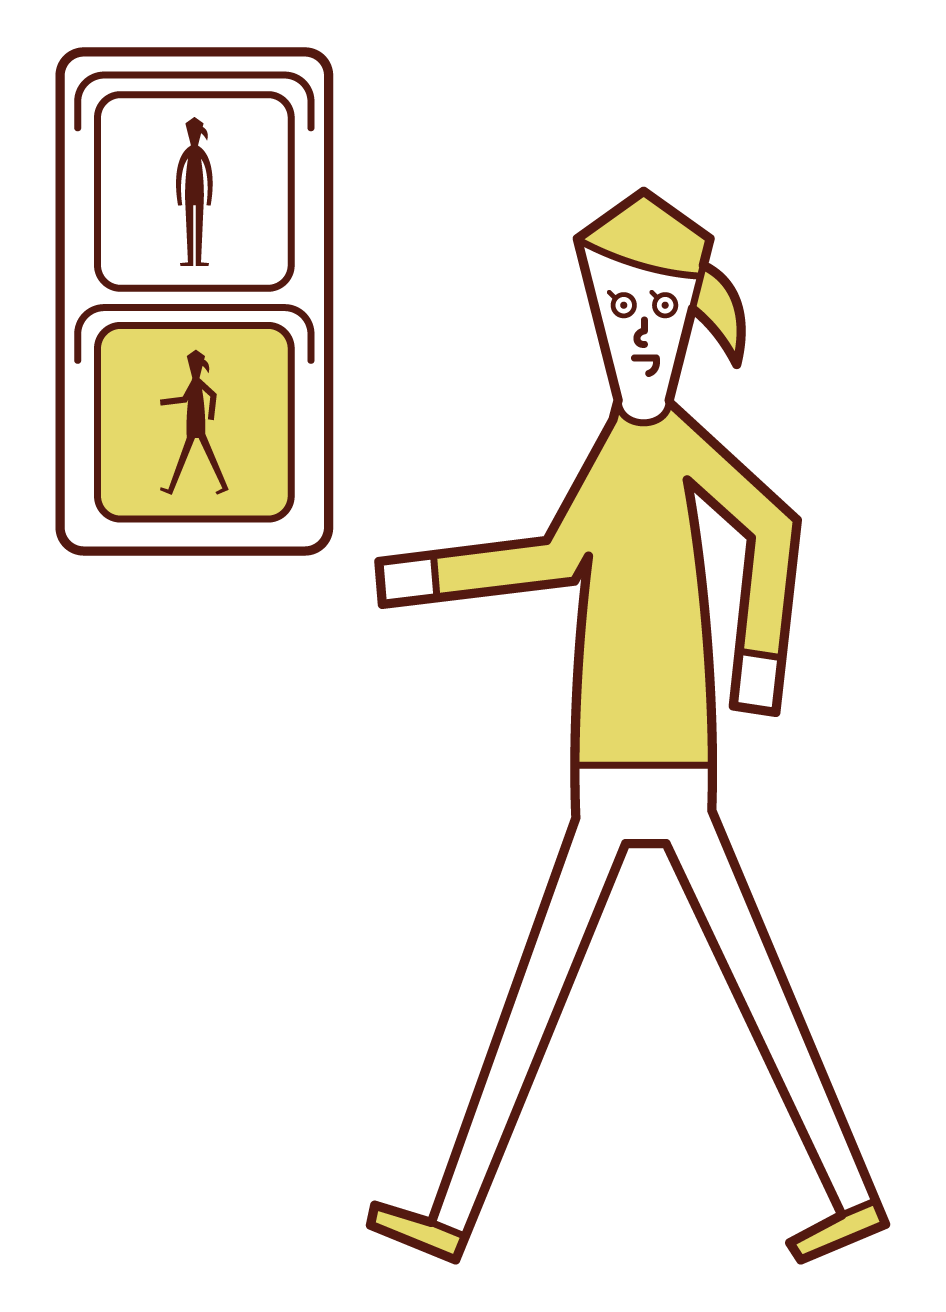 Illustration of a woman advancing at a green light